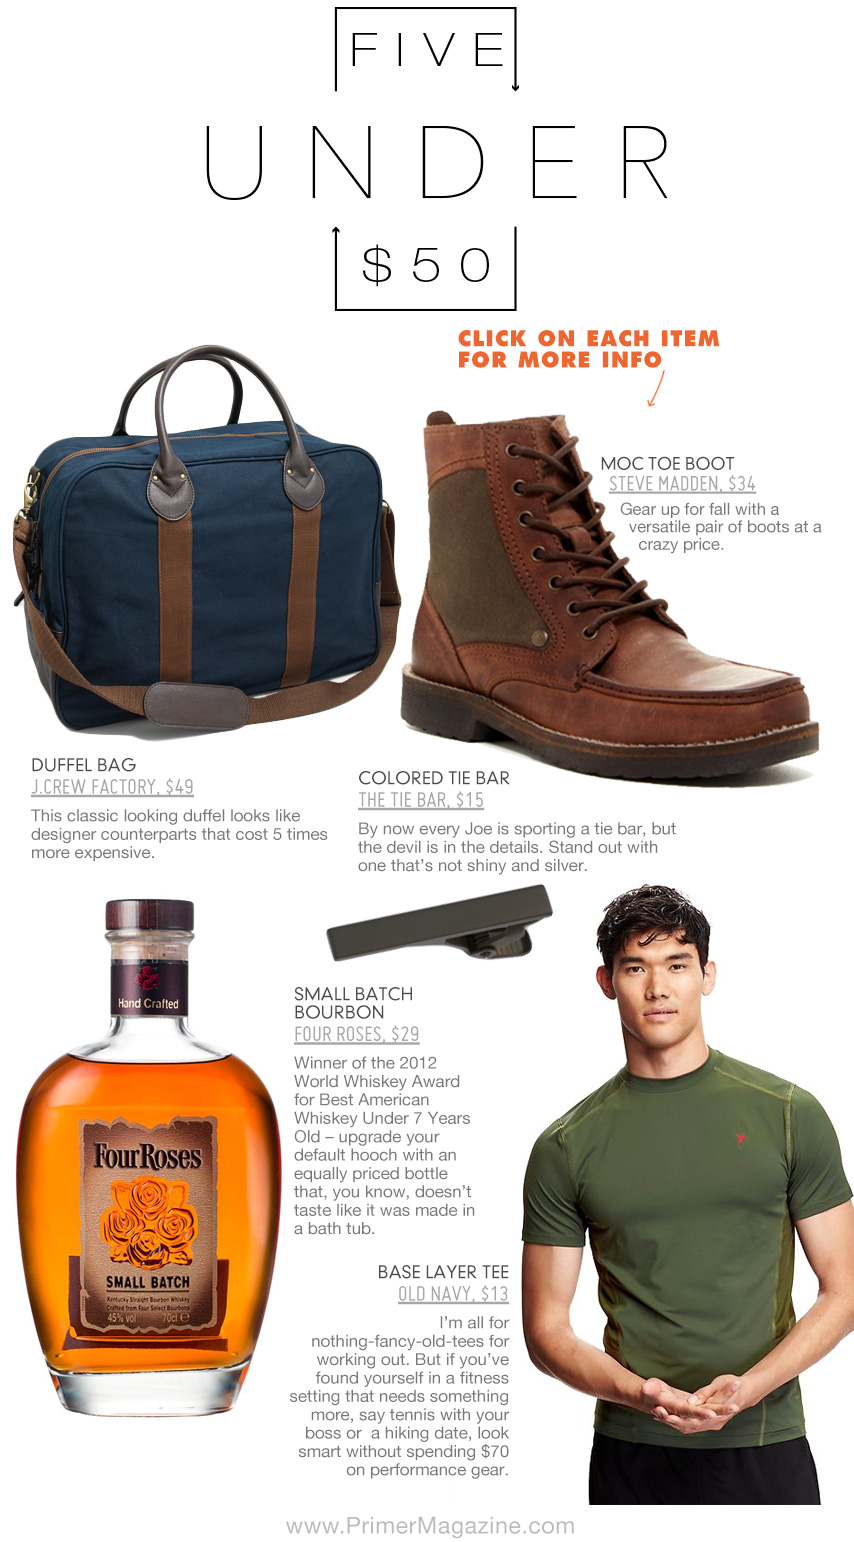 5 Under 50 with briefcase, boots, Four Roses Bourbon, Tie Bar, and workout shirt